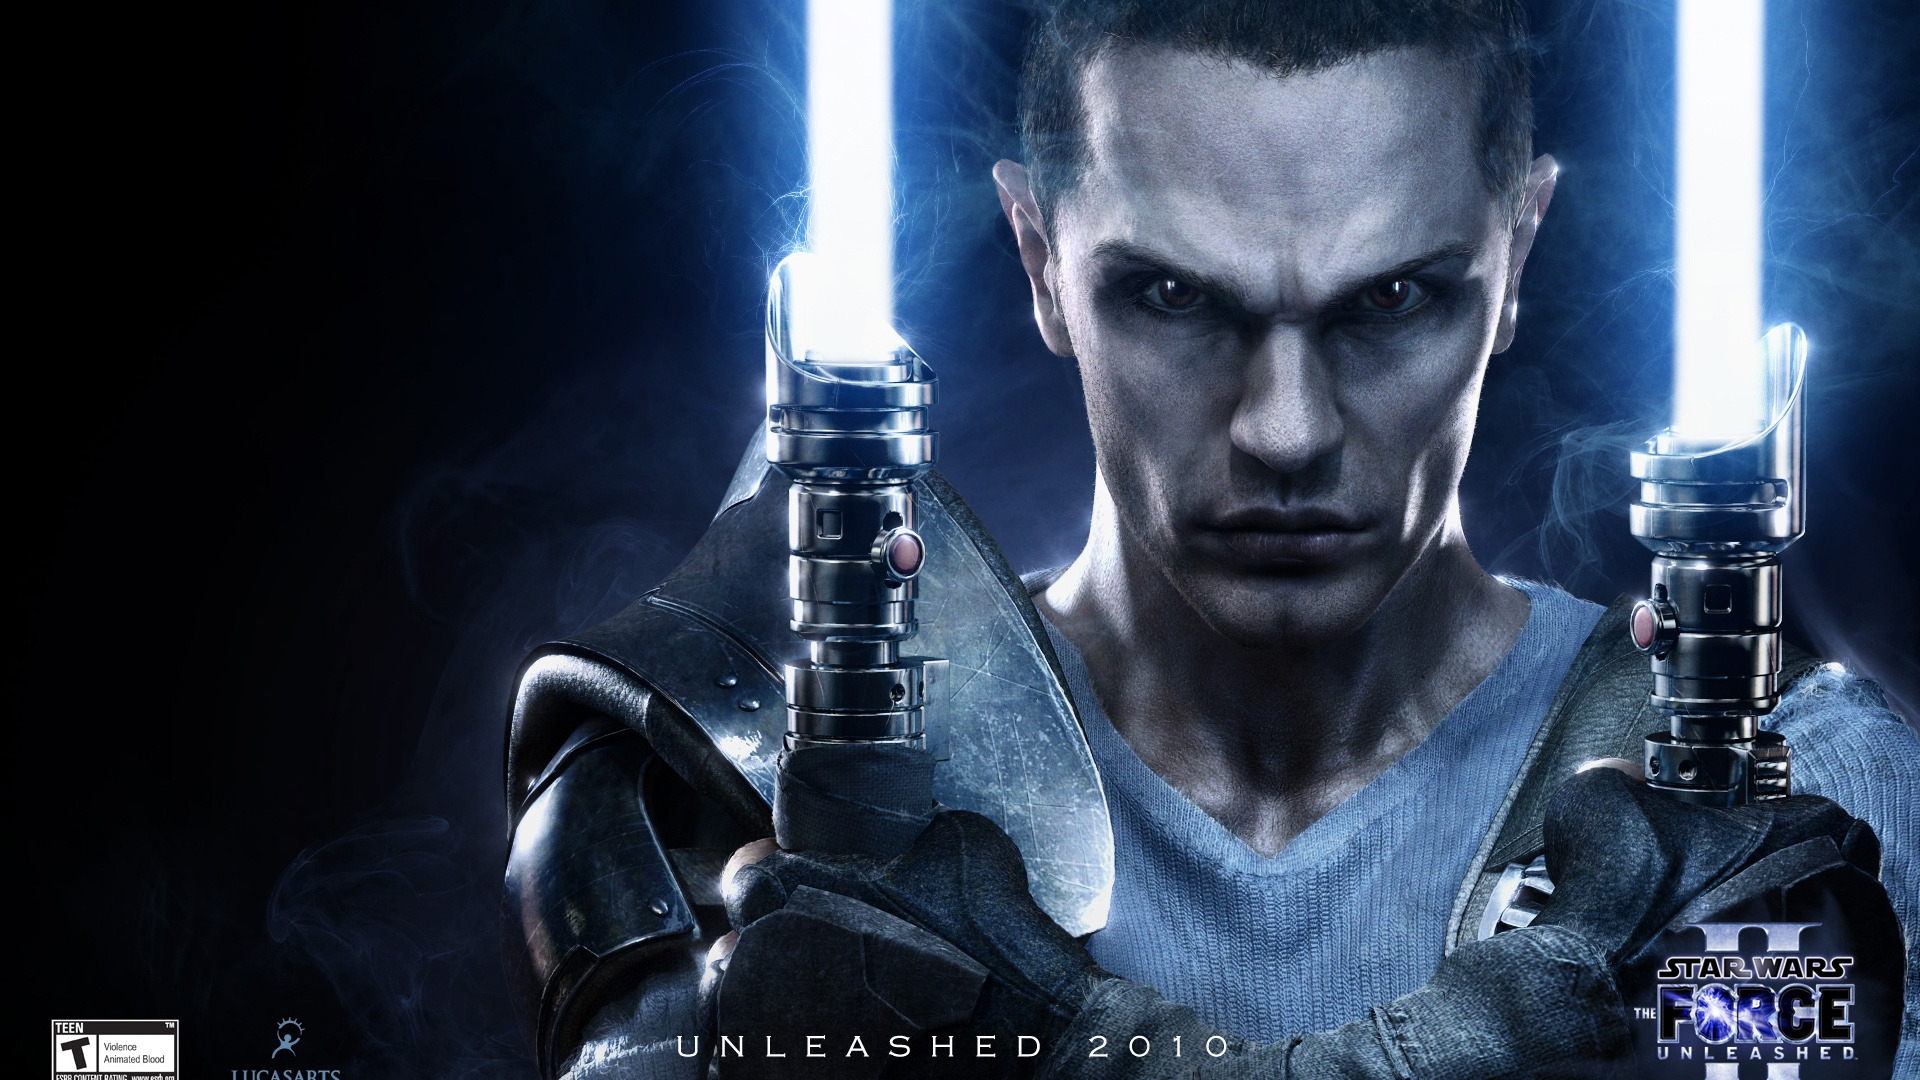 The Force Unleashed 2 for 1920 x 1080 HDTV 1080p resolution